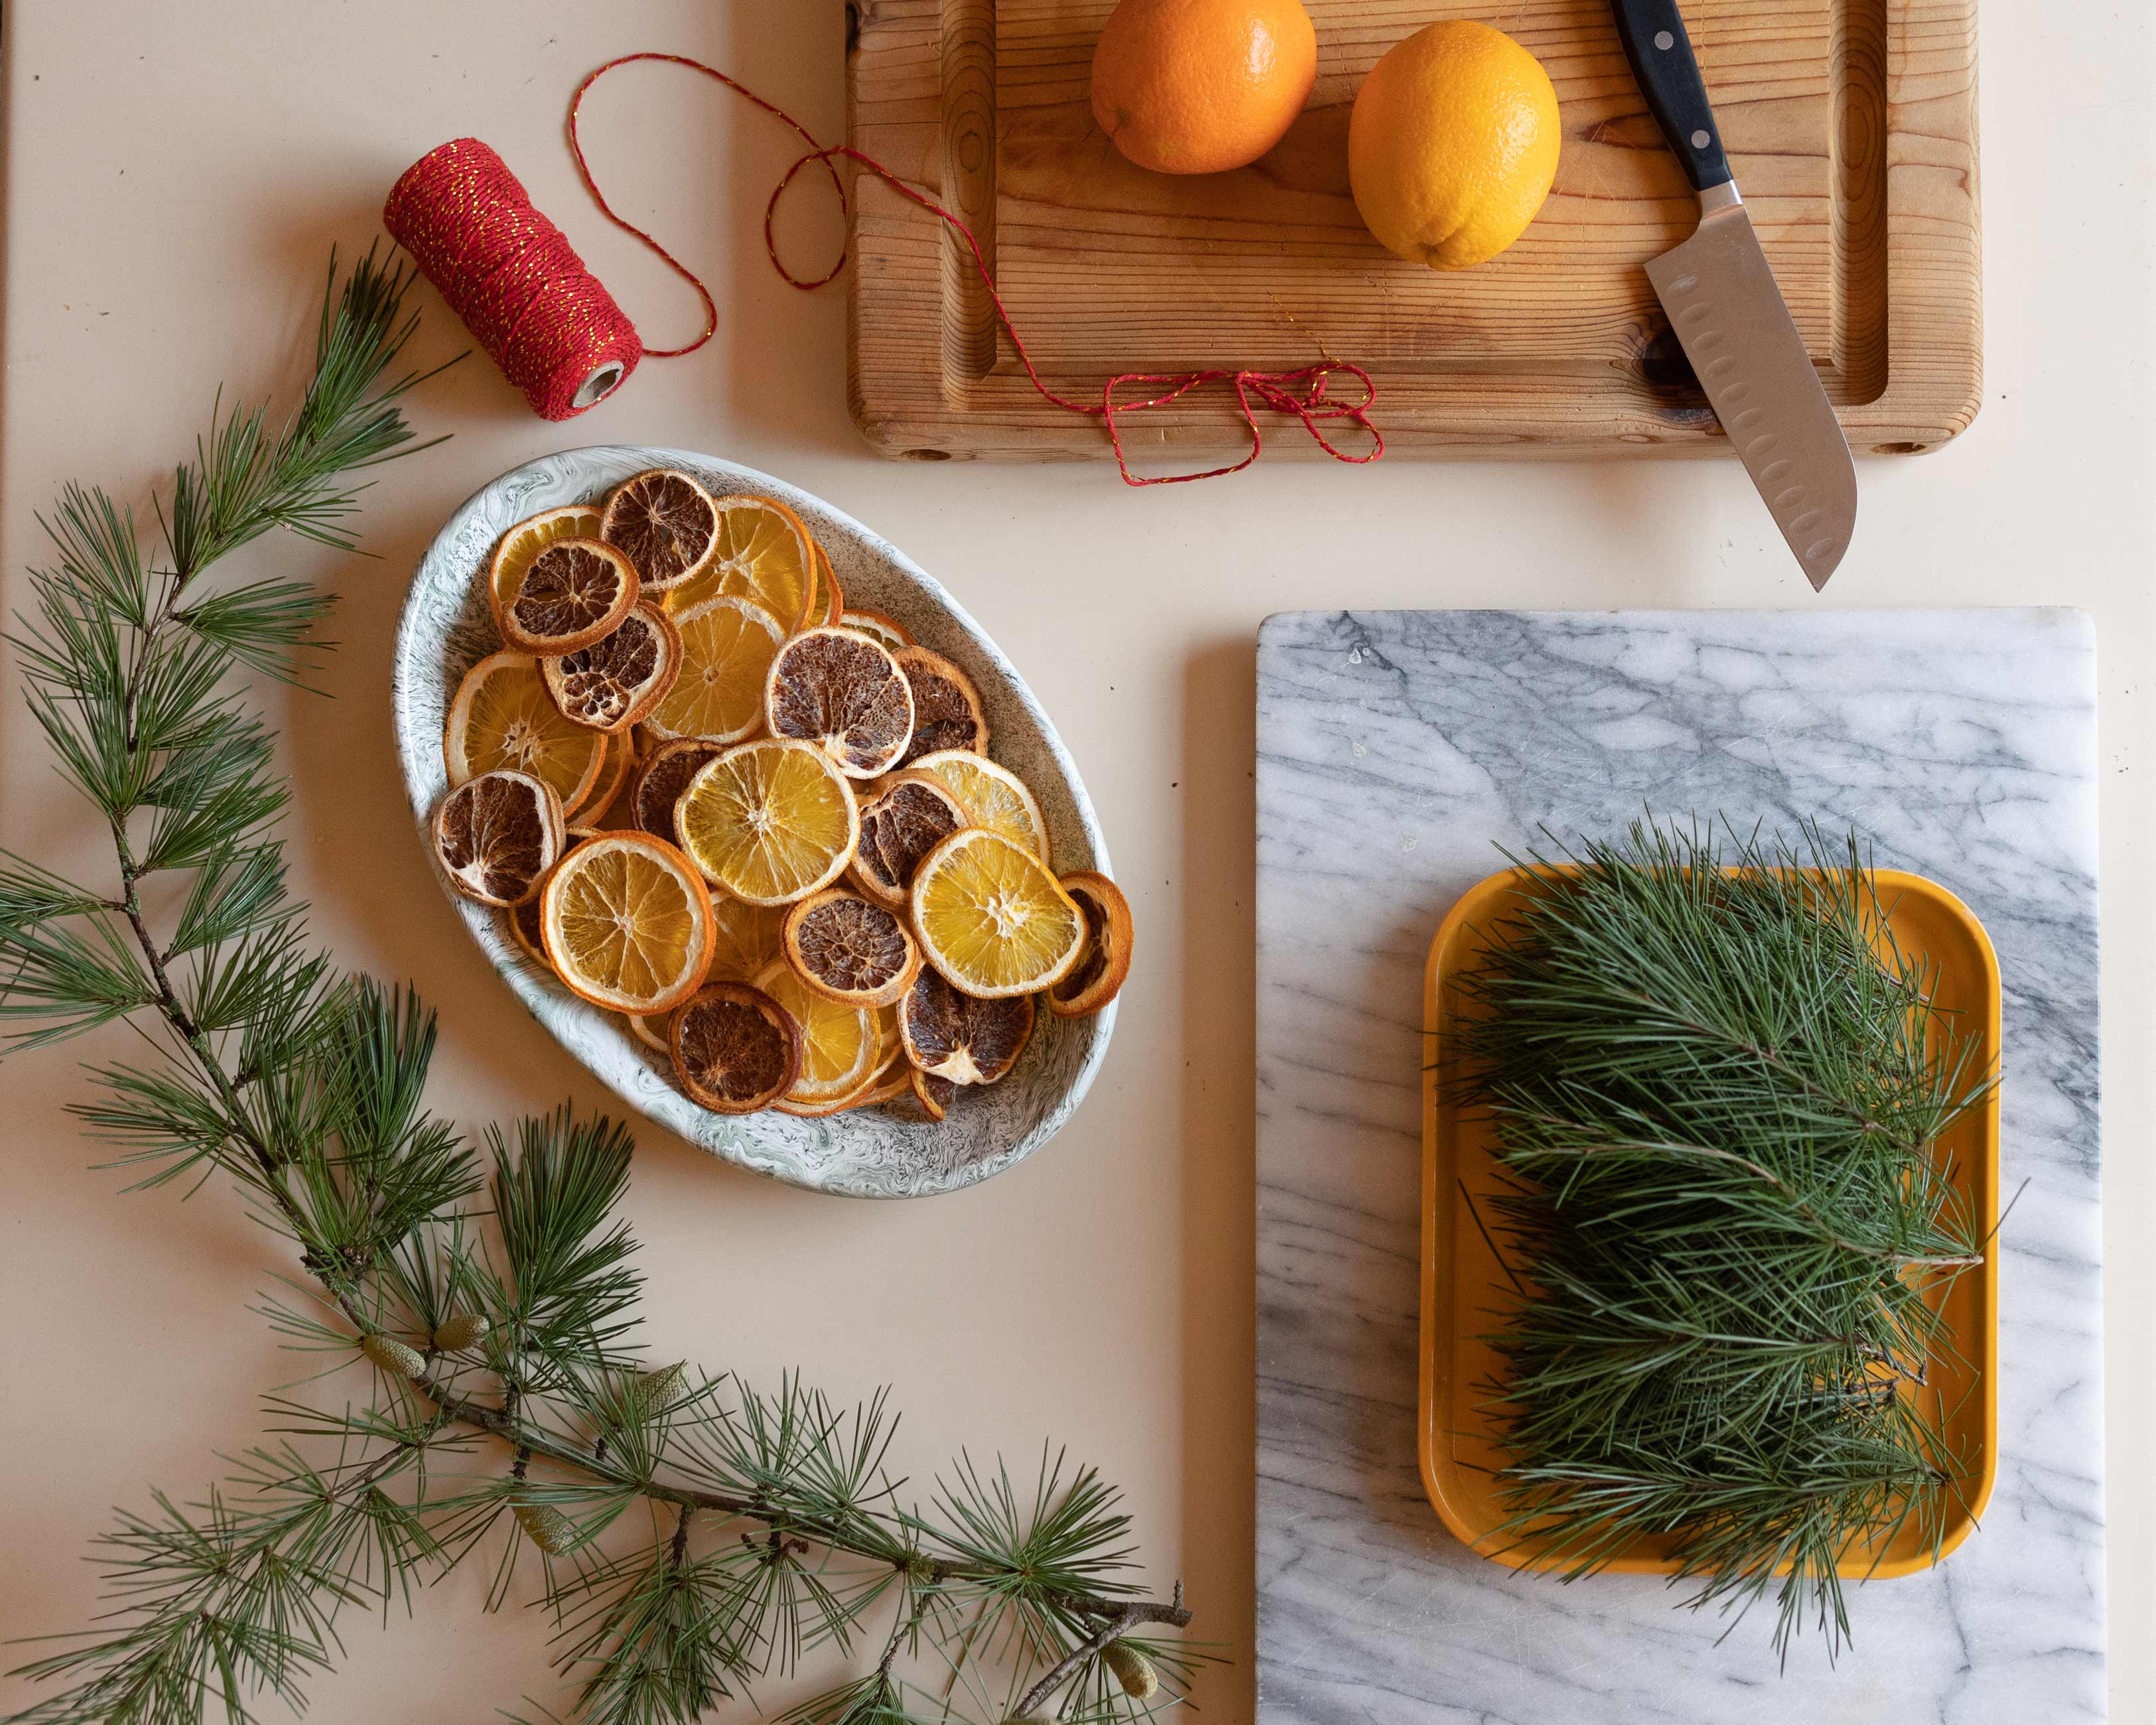 Pine needles and dried citrus on table with twine.